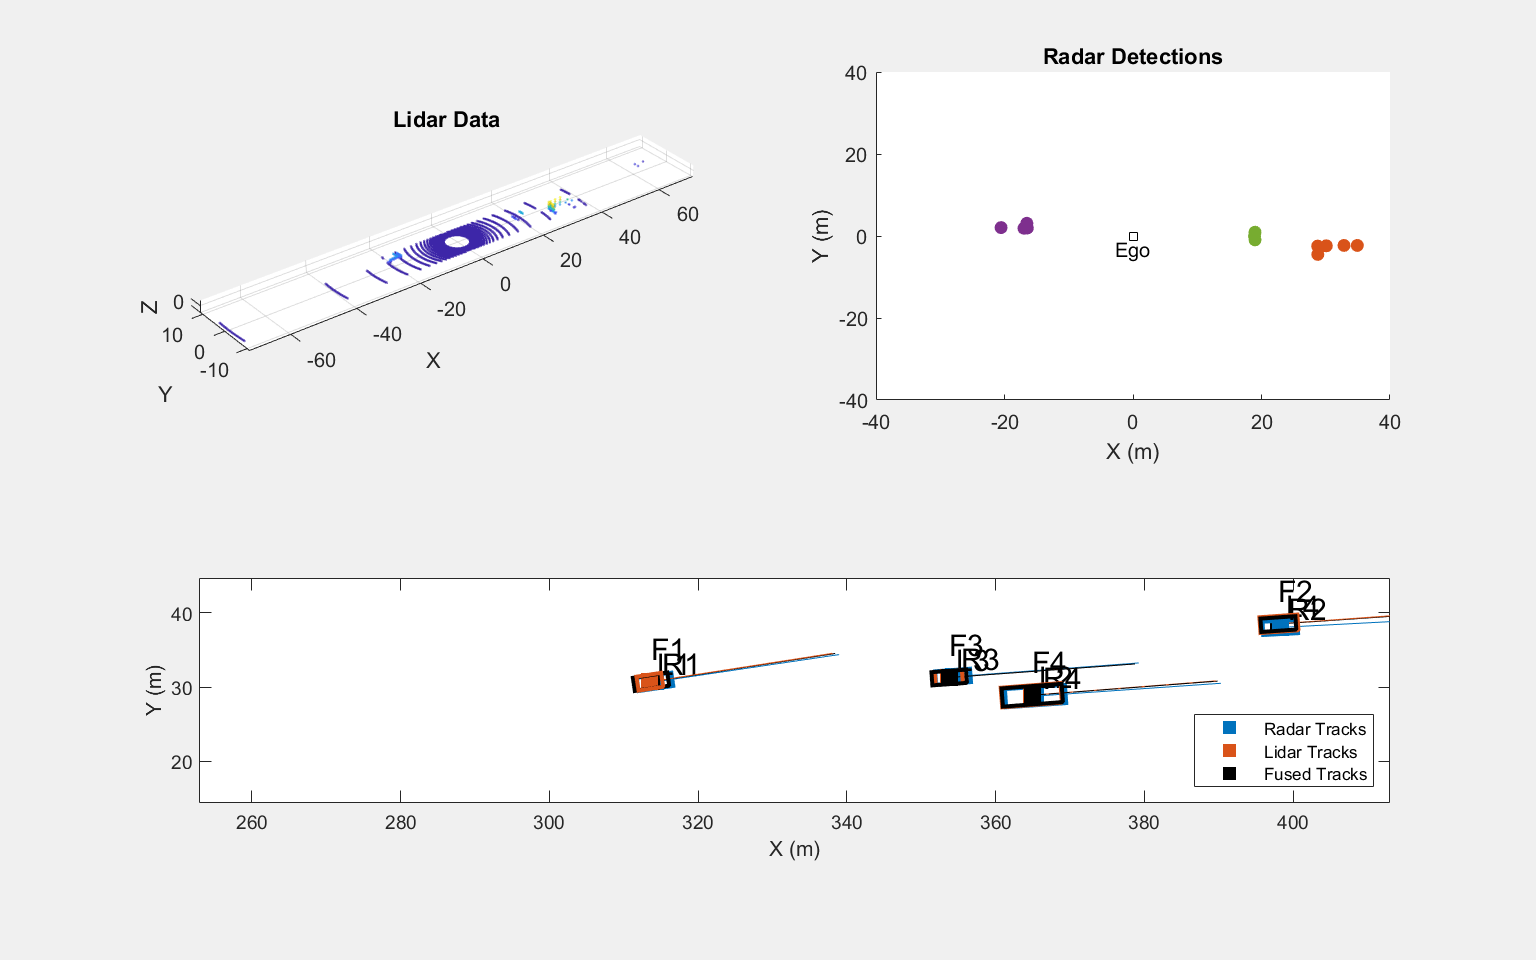 Figure contains 3 axes objects. Axes object 1 with title Lidar Data, xlabel X, ylabel Y contains an object of type scatter. Axes object 2 with title Radar Detections, xlabel X (m), ylabel Y (m) contains 18 objects of type line, text. One or more of the lines displays its values using only markers Axes object 3 with xlabel X (m), ylabel Y (m) contains 15 objects of type line, text. One or more of the lines displays its values using only markers These objects represent Radar Tracks, Lidar Tracks, Fused Tracks.